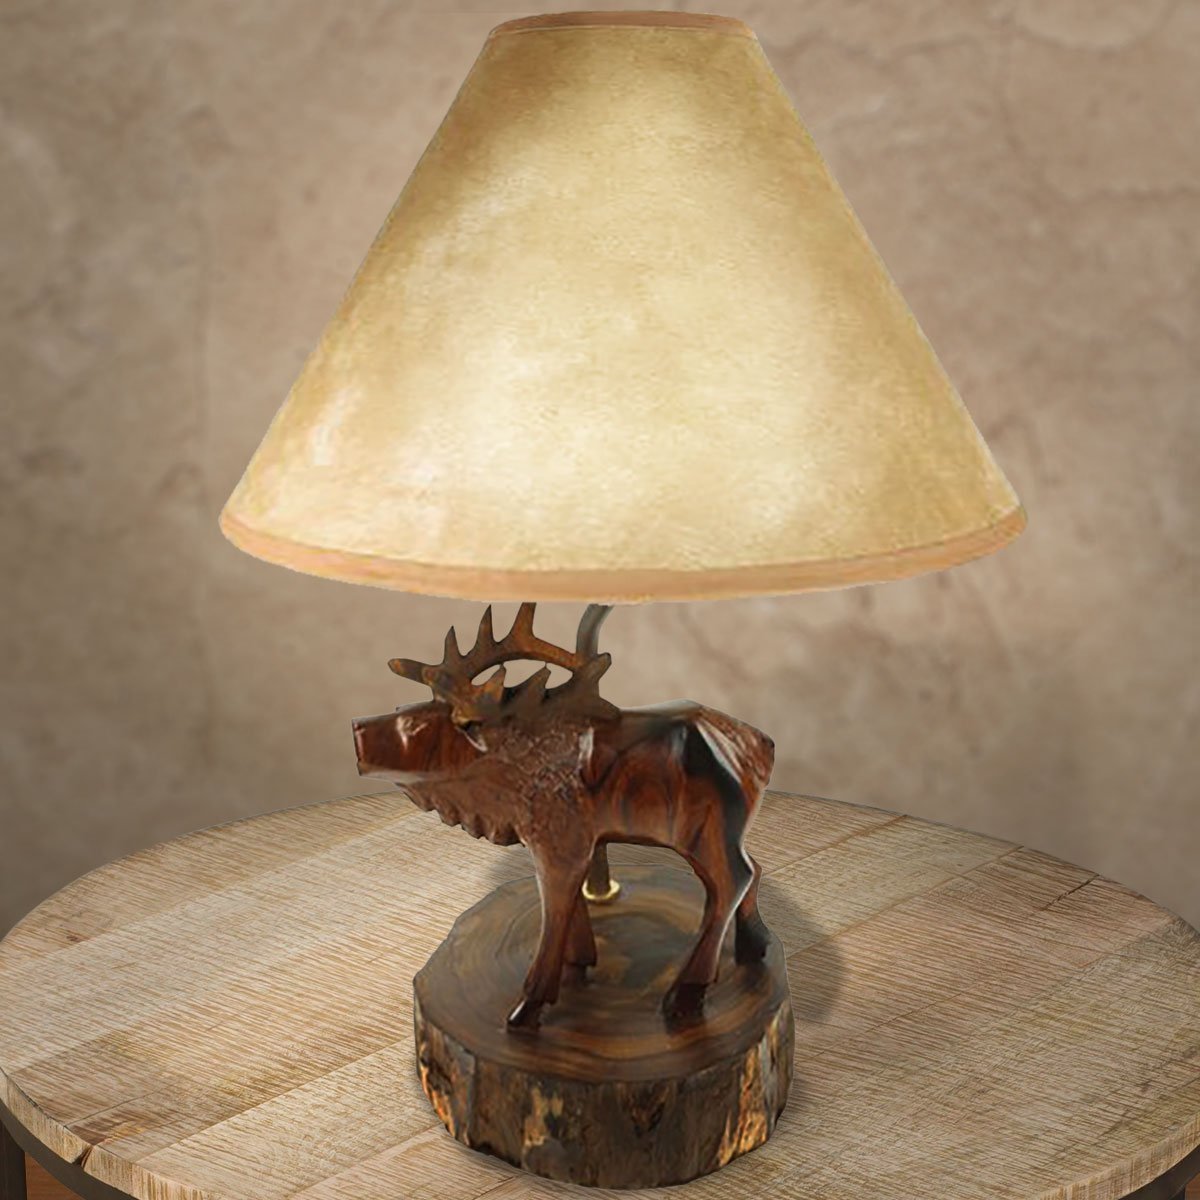 172005 - Elk Ironwood Table Lamp with Shade